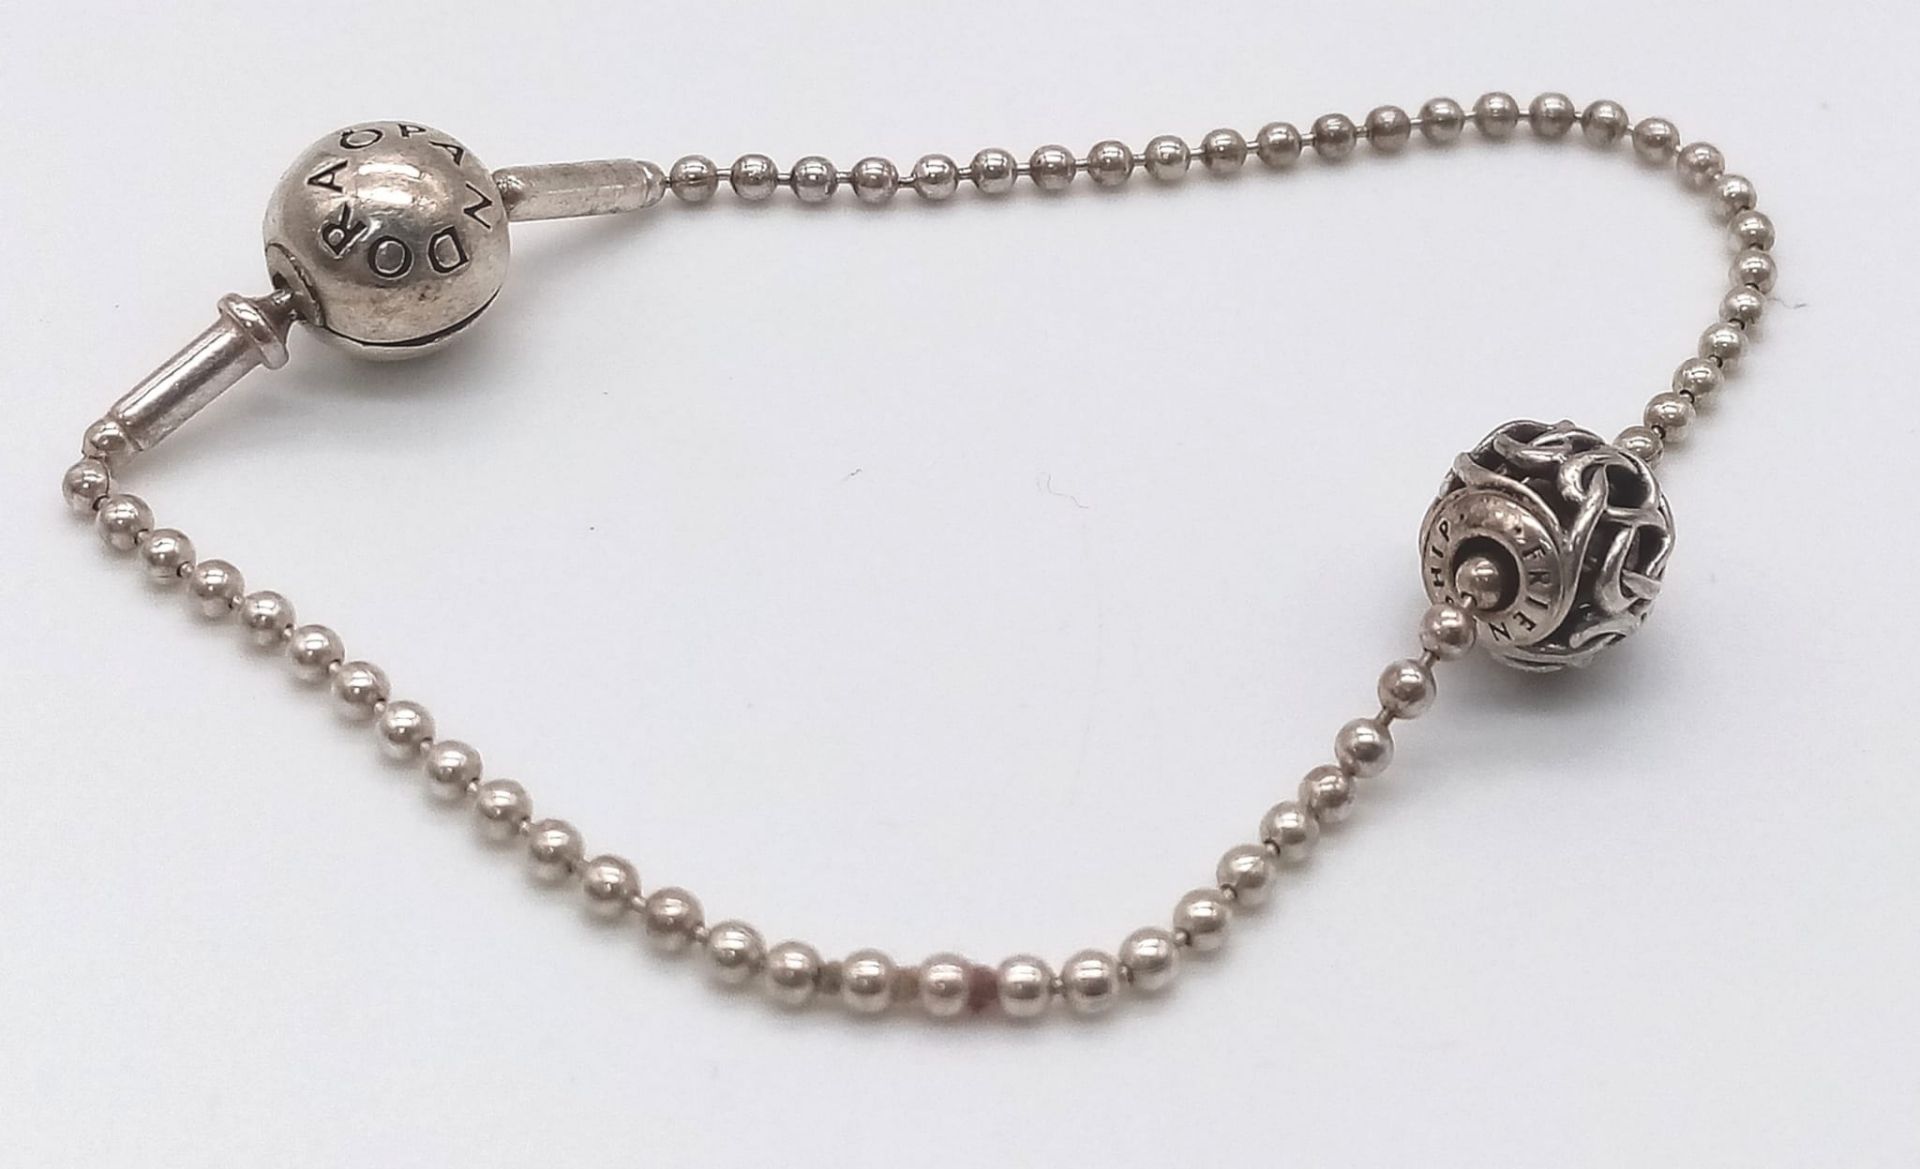 A sterling silver PANDORA friendship bracelet with two beads/charms. Weight: 6.8 g. - Bild 6 aus 6